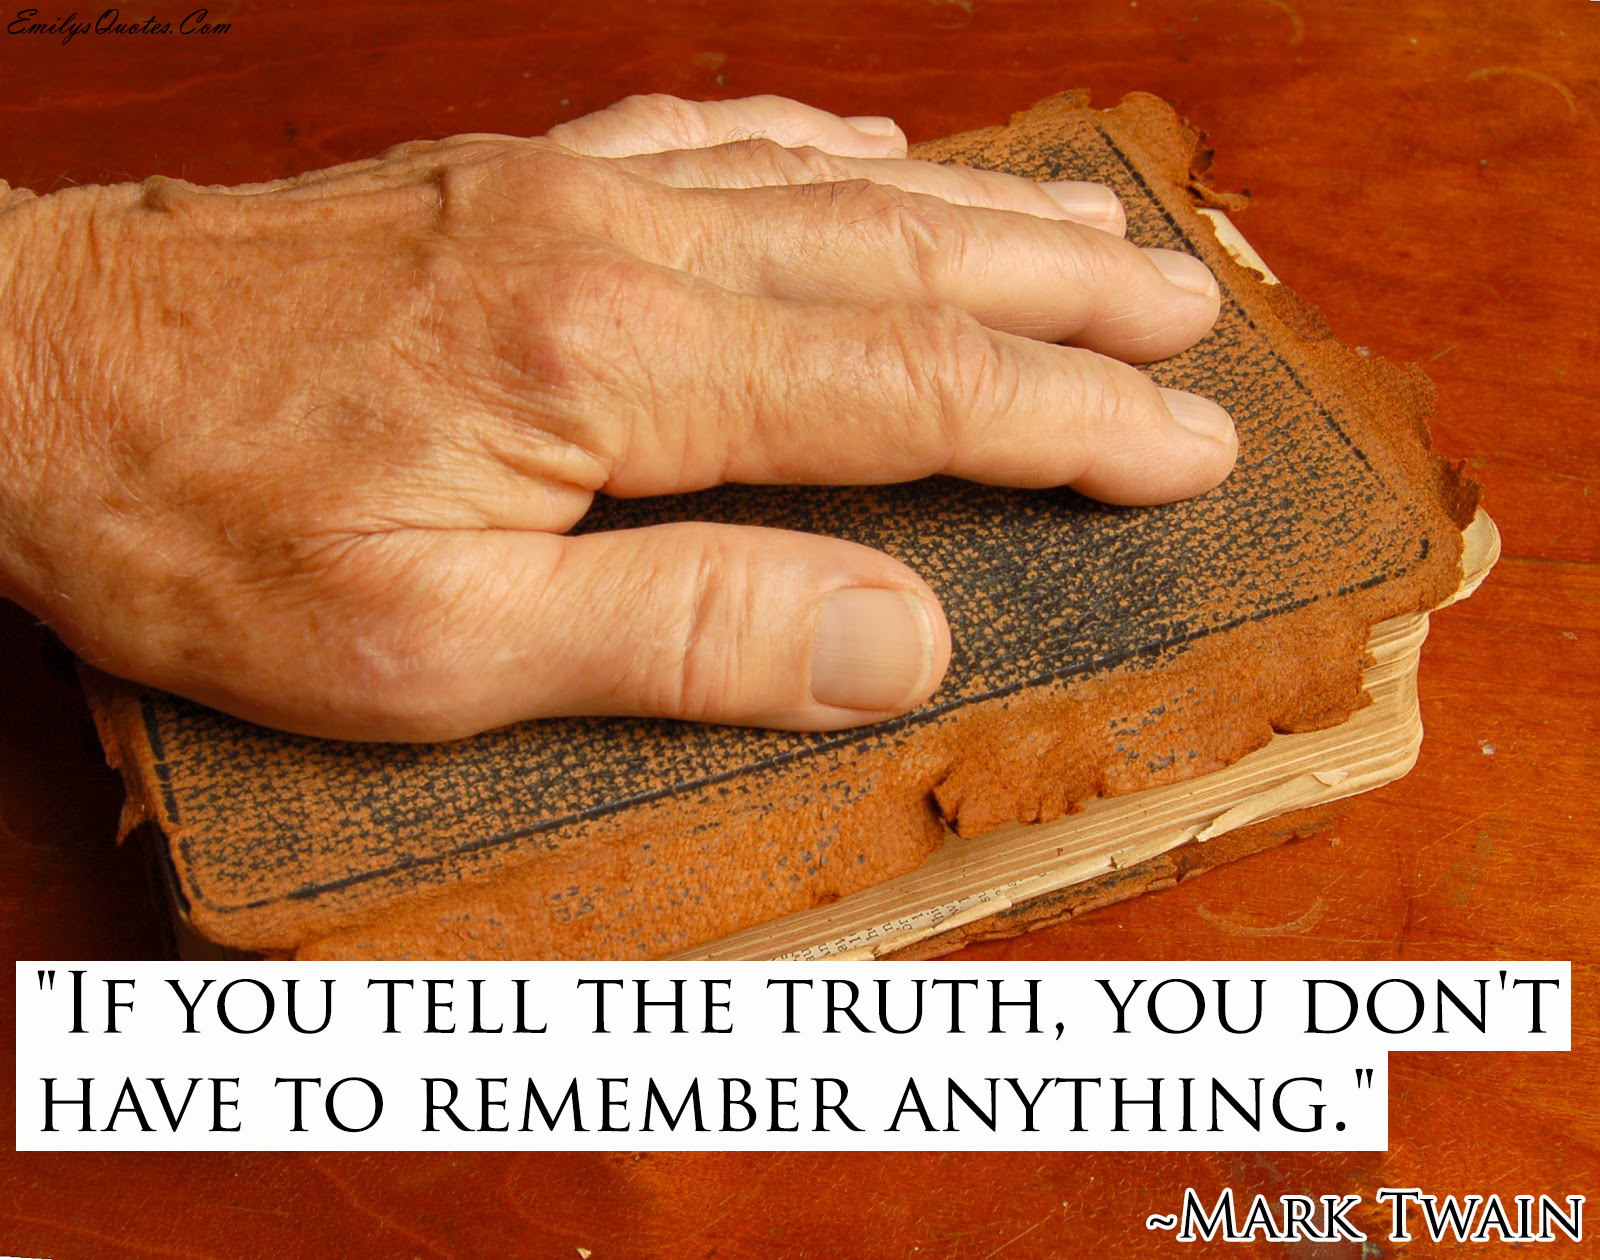 If you tell the truth, you don’t have to remember anything